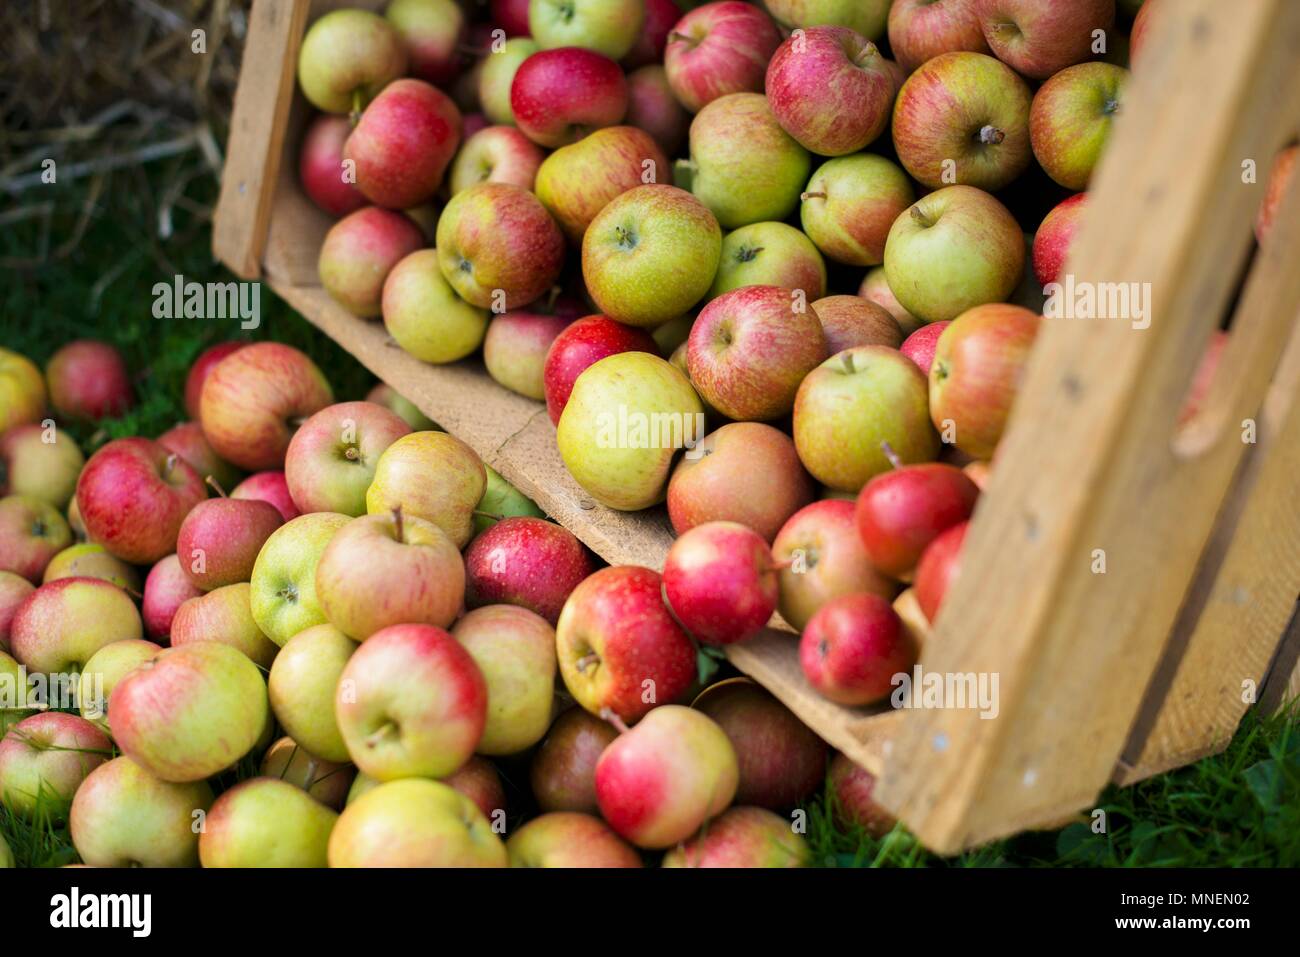 Freshly harvested apples falling out of a wooden crate Stock Photo